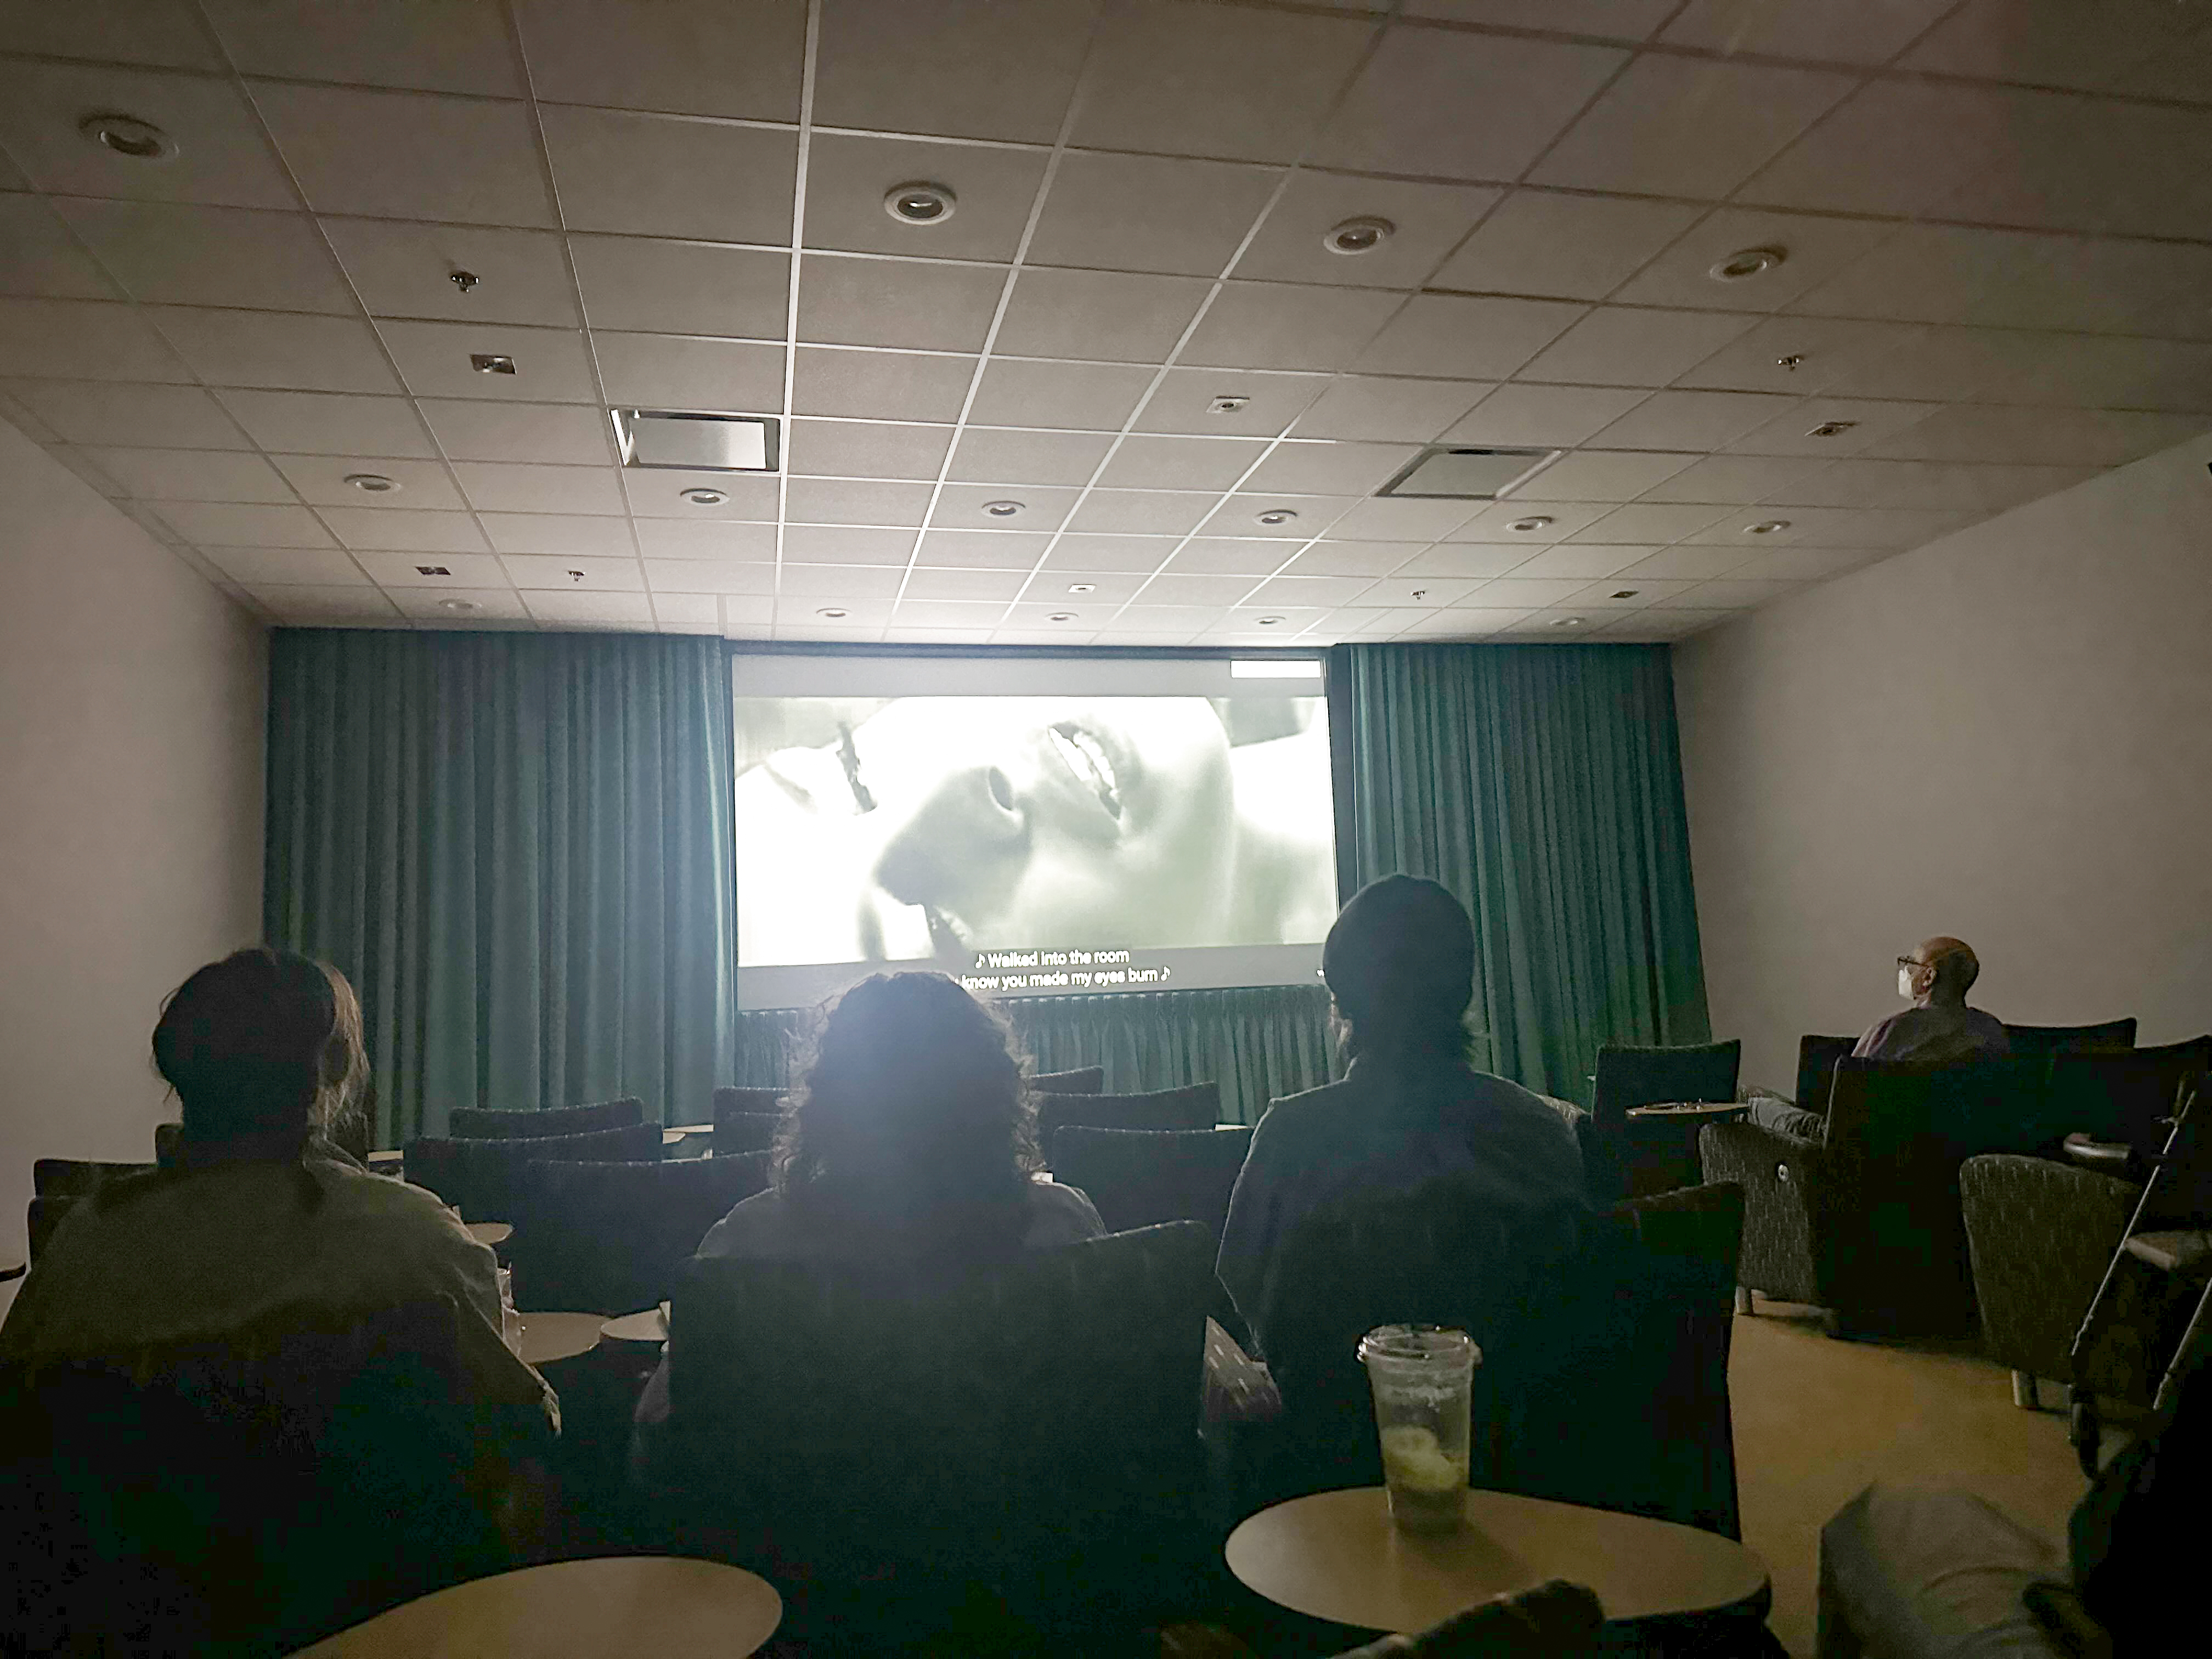 Oualid Mouaness showing the music video he produced called Blue Jeans by Lana Del Ray. (Emma Welniak Photo)